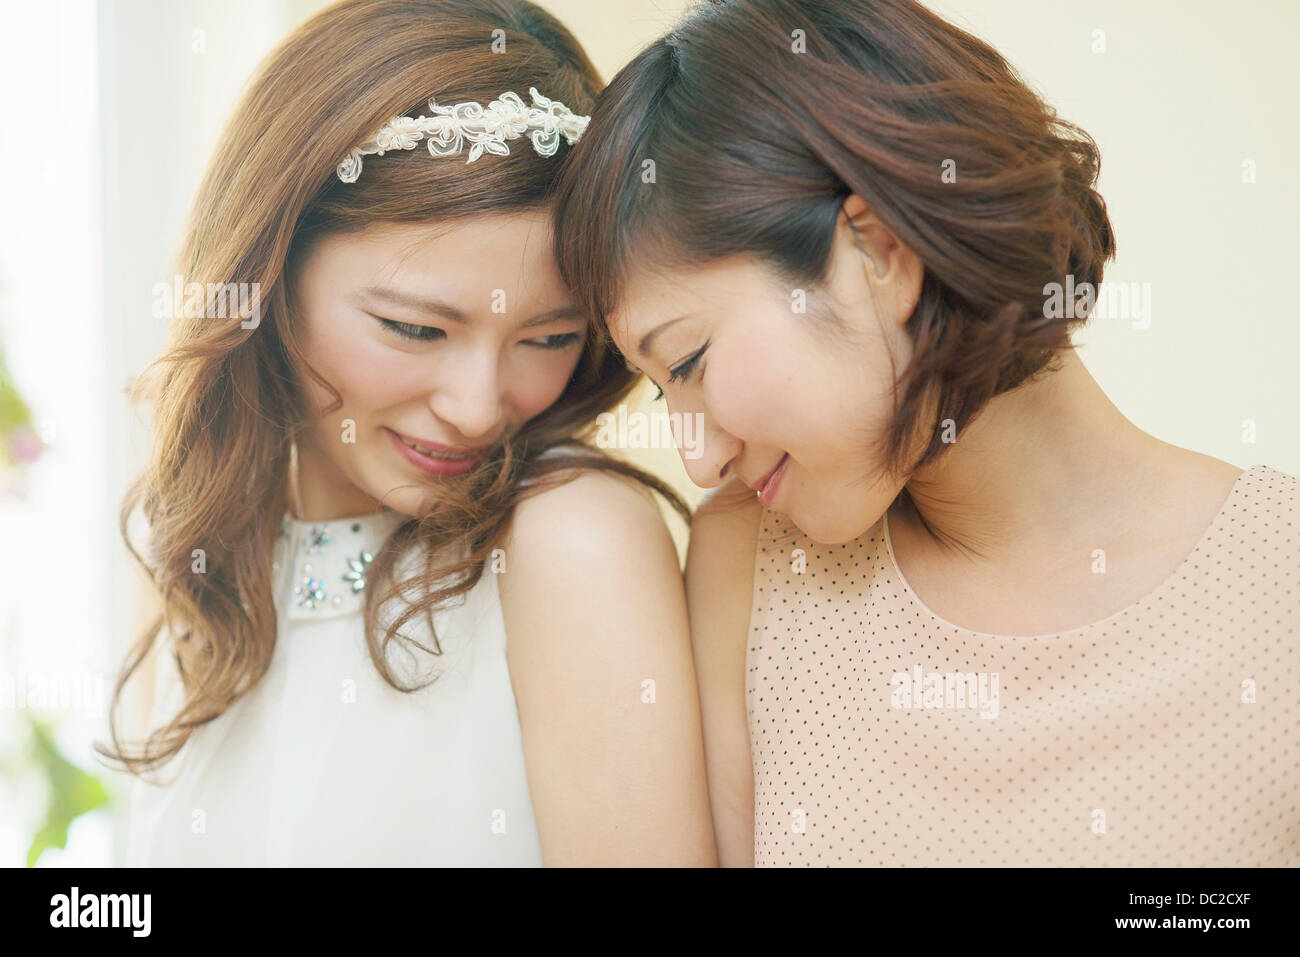 Two women nuzzling foreheads Stock Photo